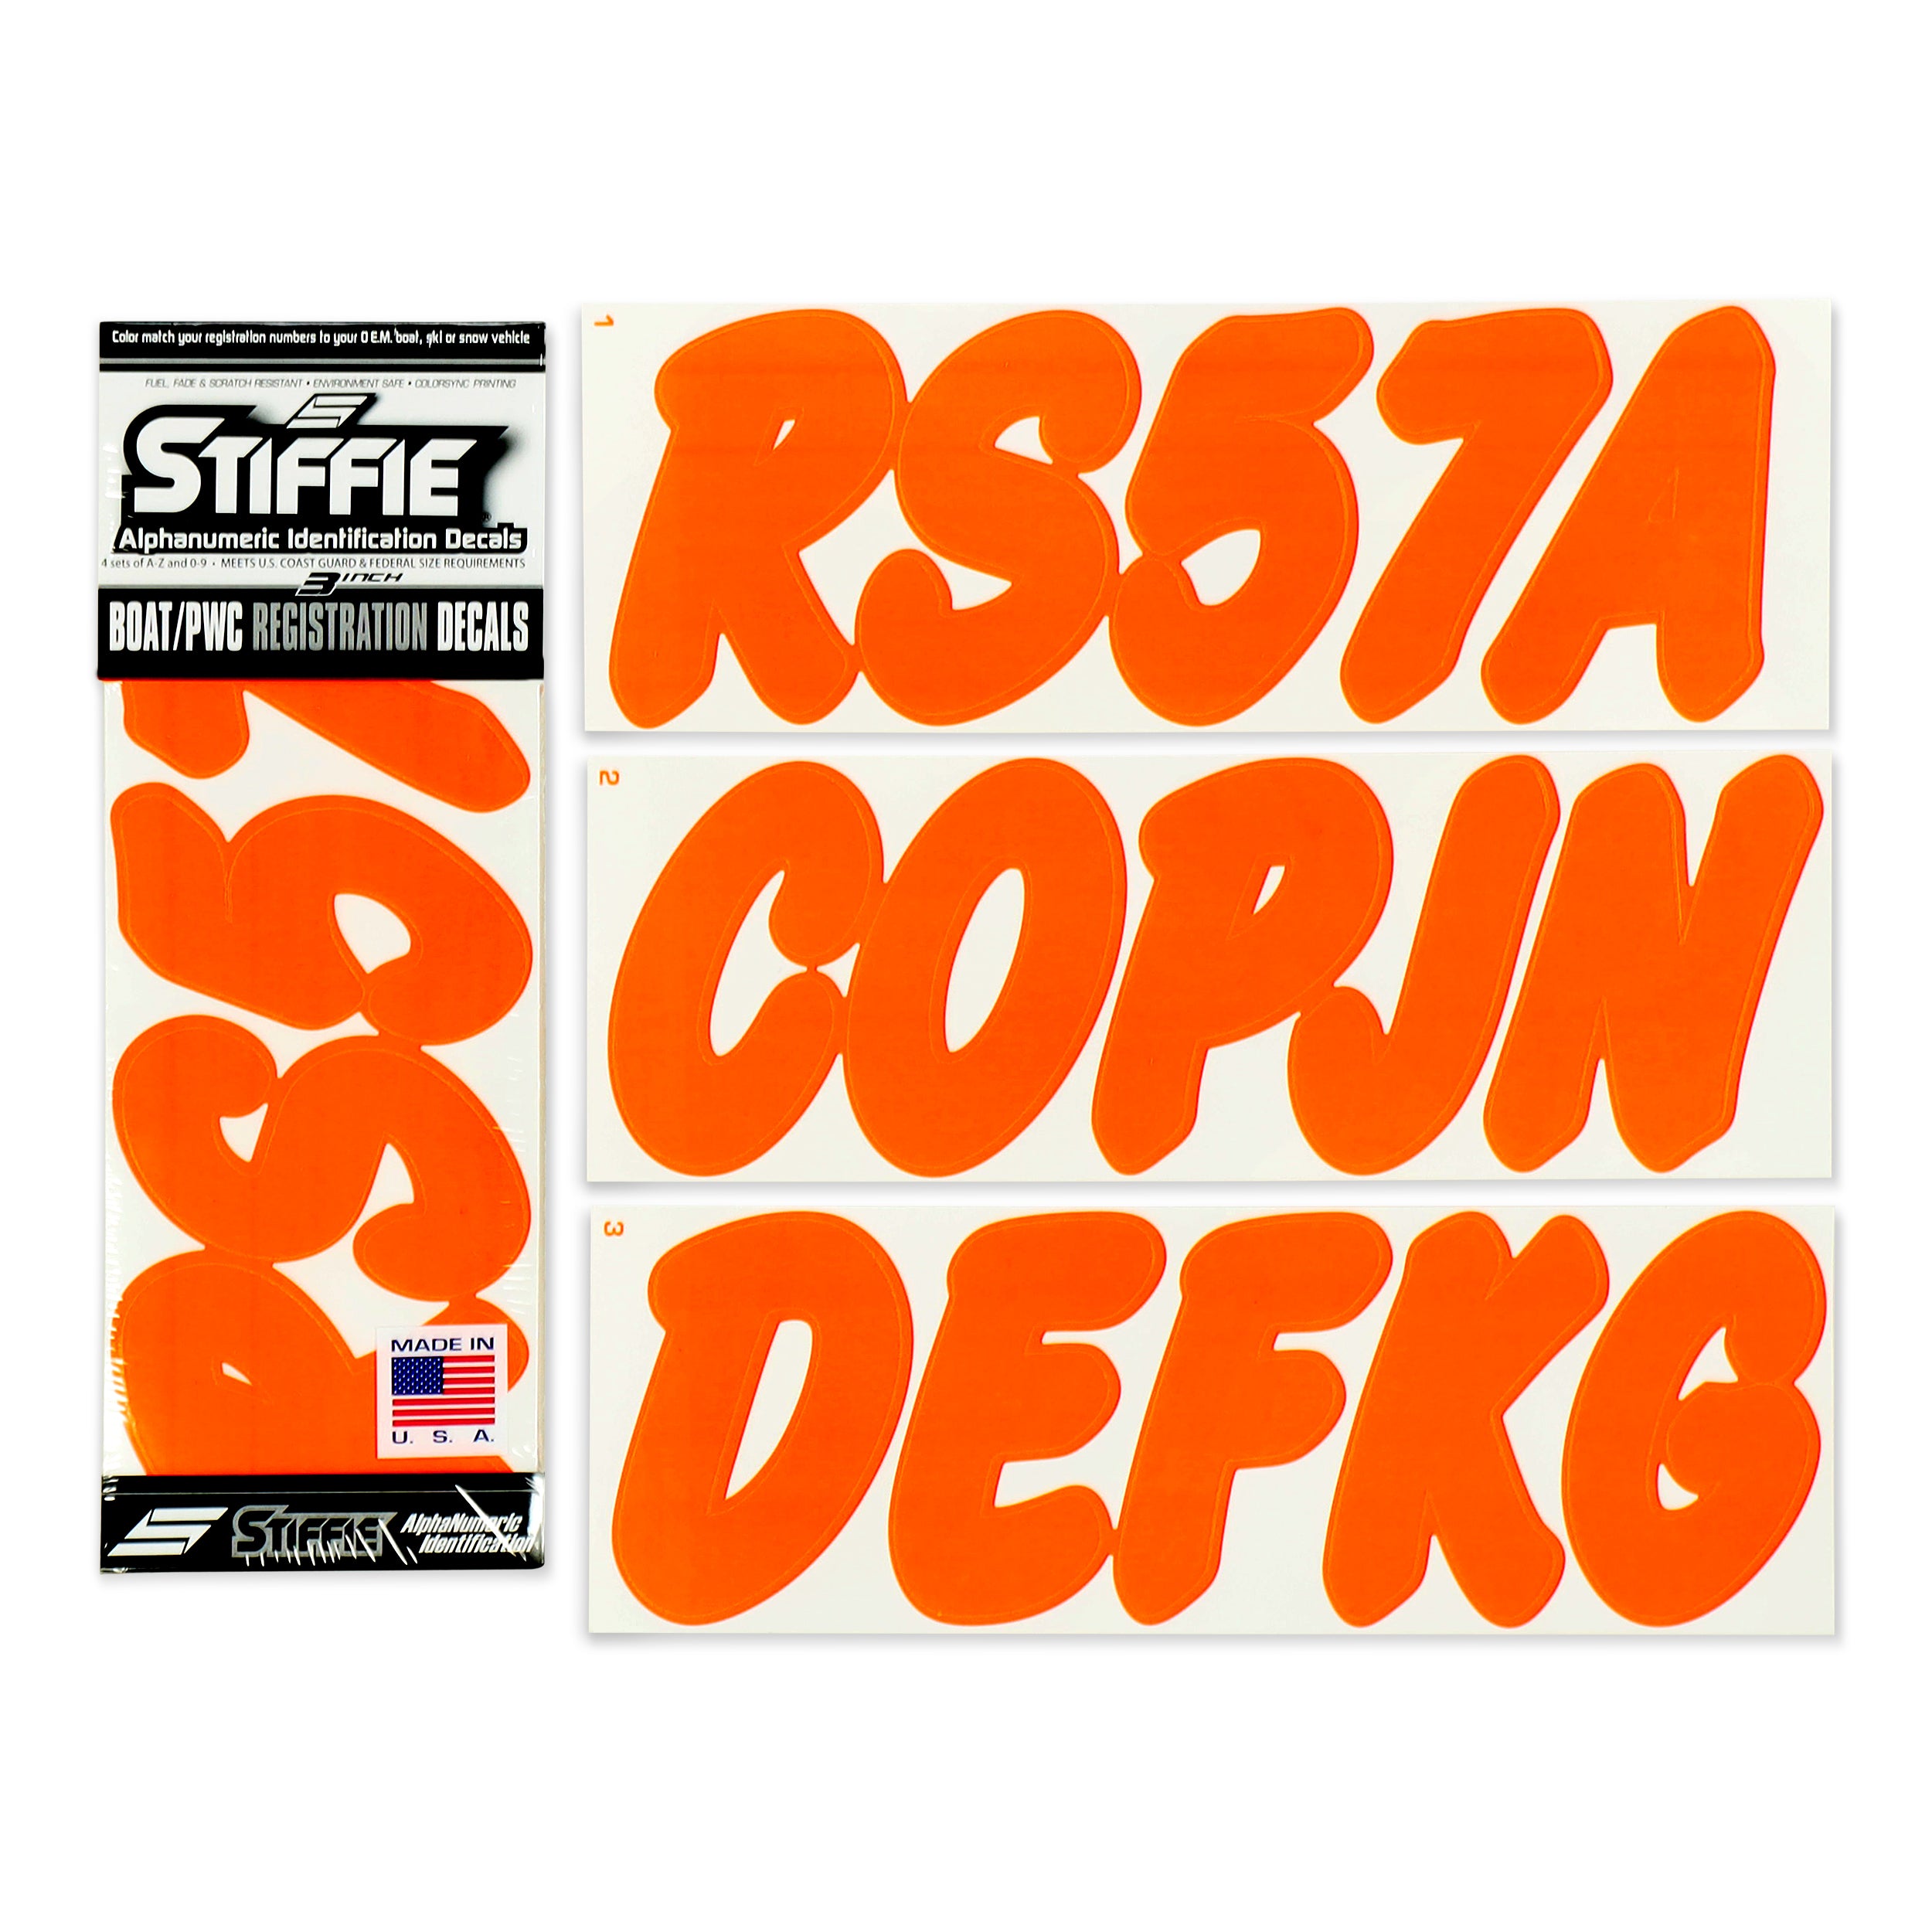 STIFFIE Whip-One Electric Orange 3" Alpha-Numeric Registration Identification Numbers Stickers Decals for Boats & Personal Watercraft